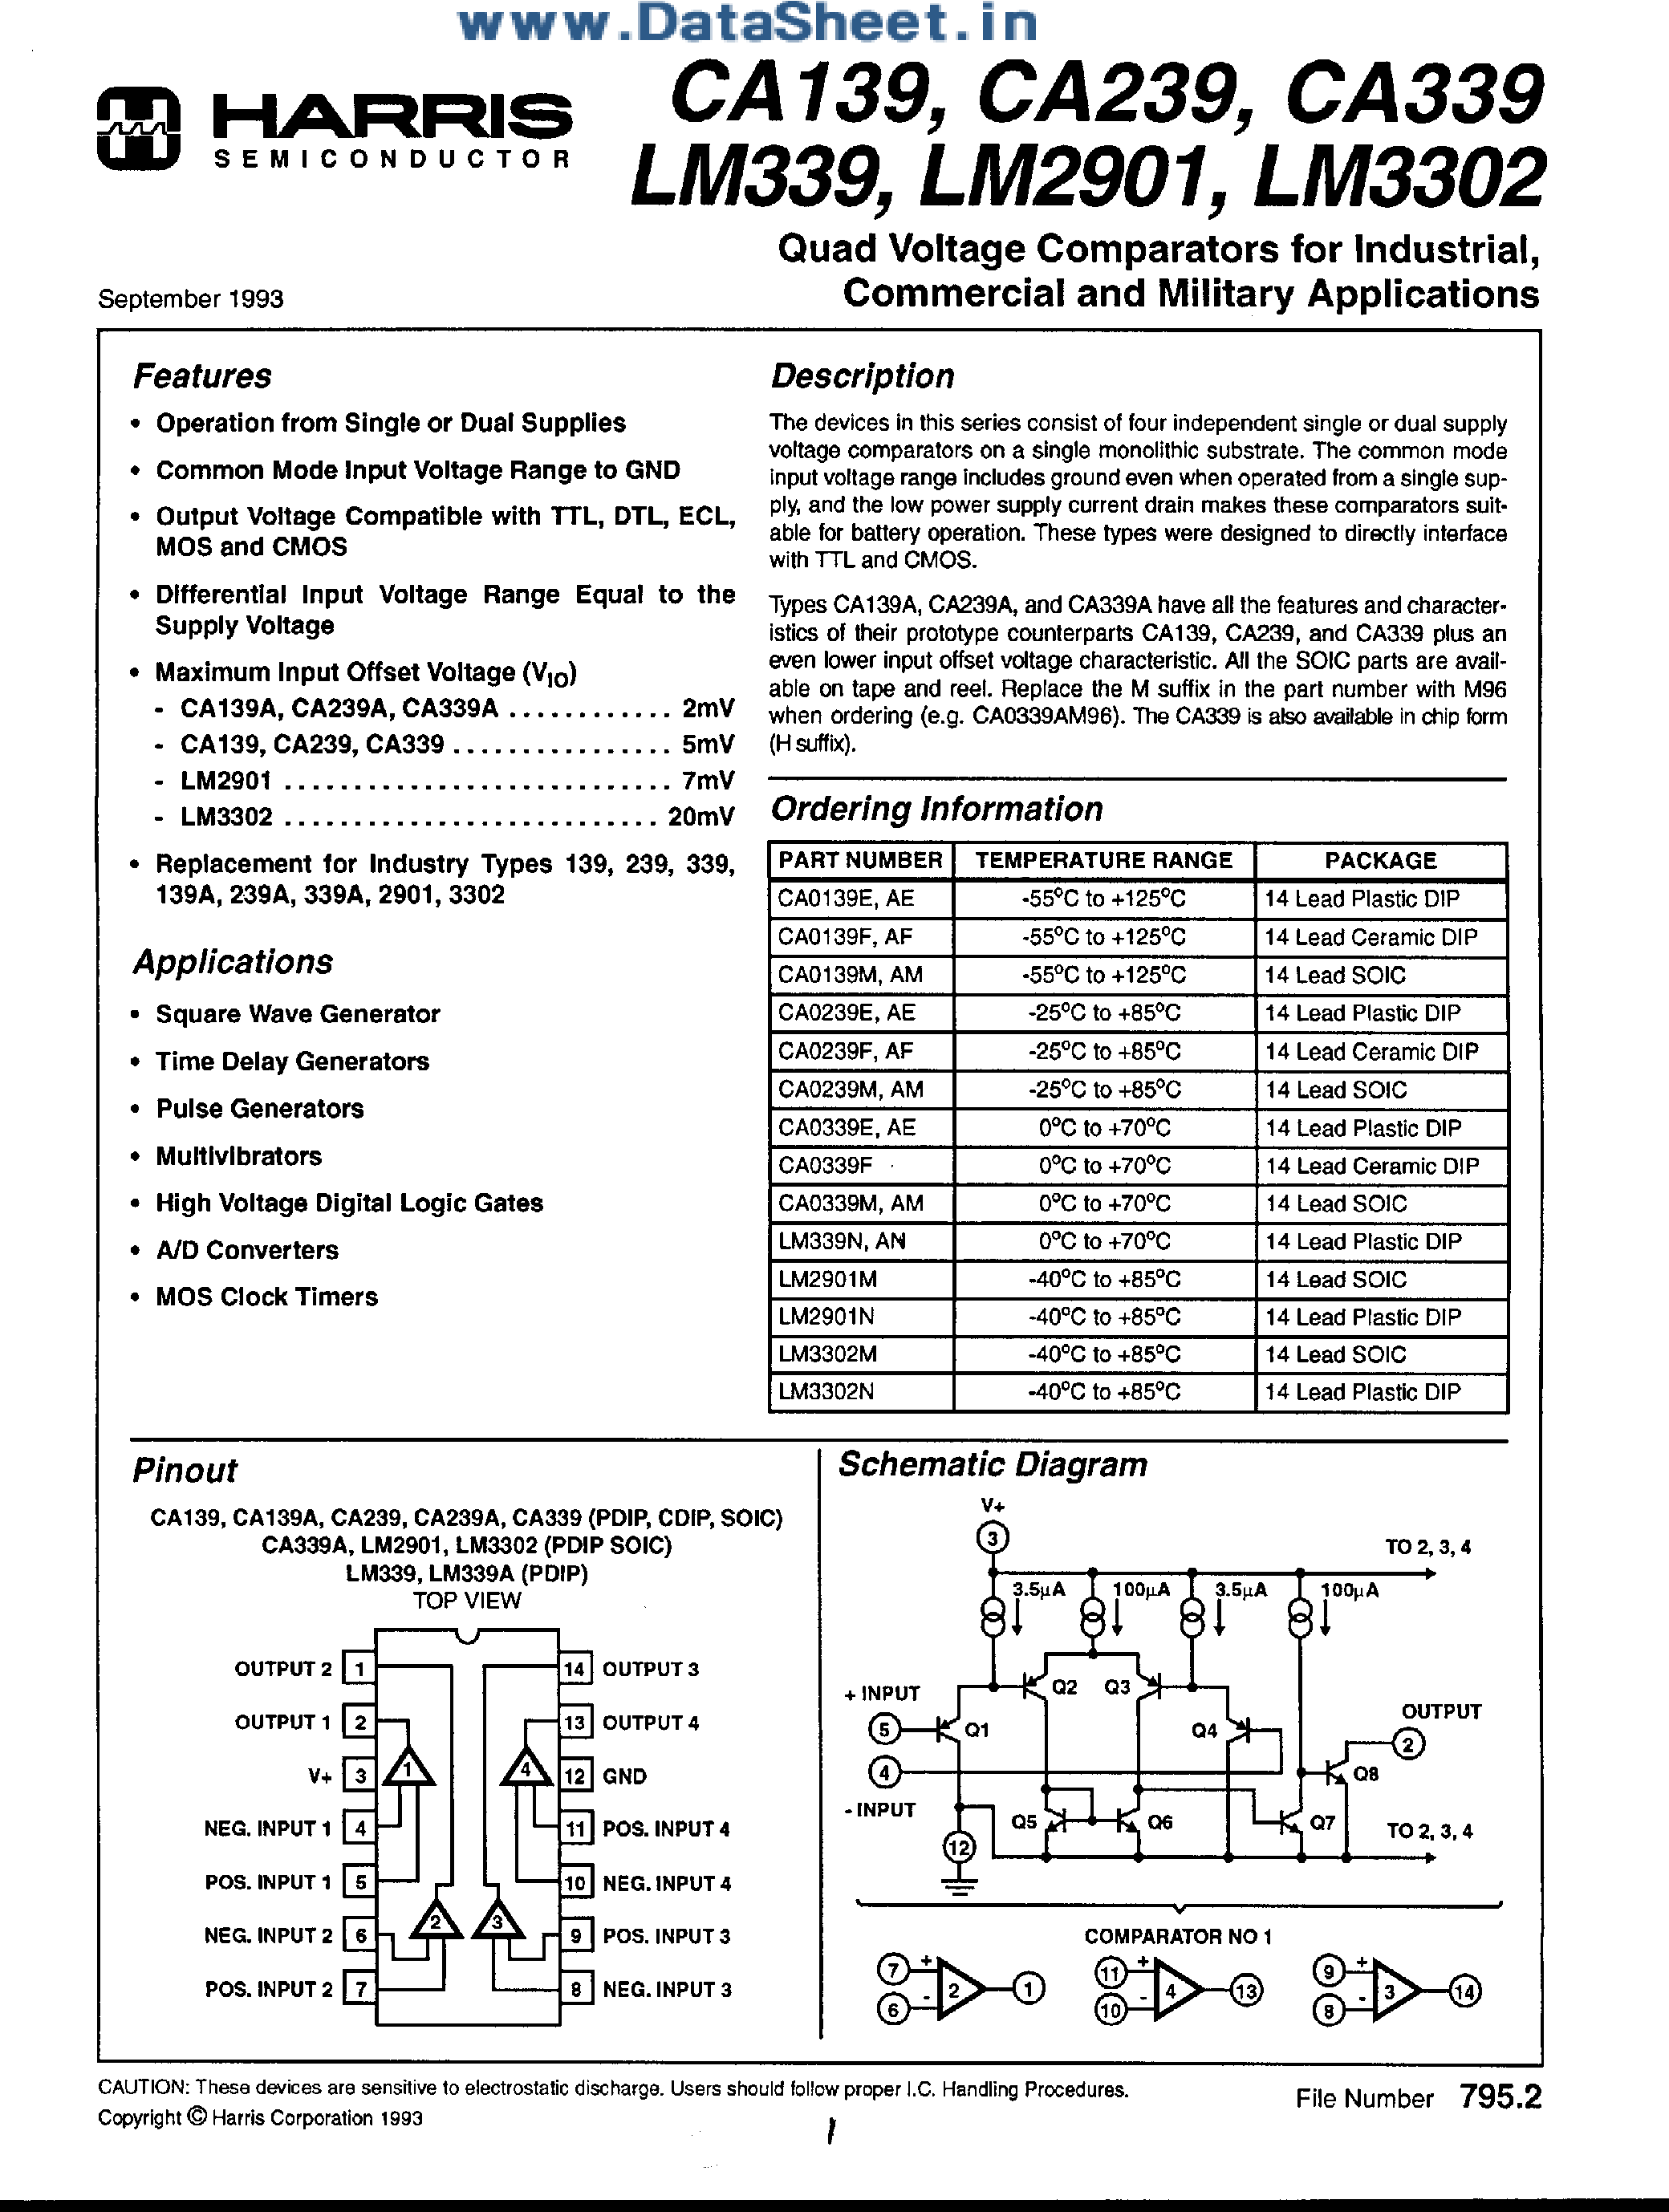 Datasheet CA239 - Quad Voltage Comparators for Industrial / Commercial and Military Applications page 1